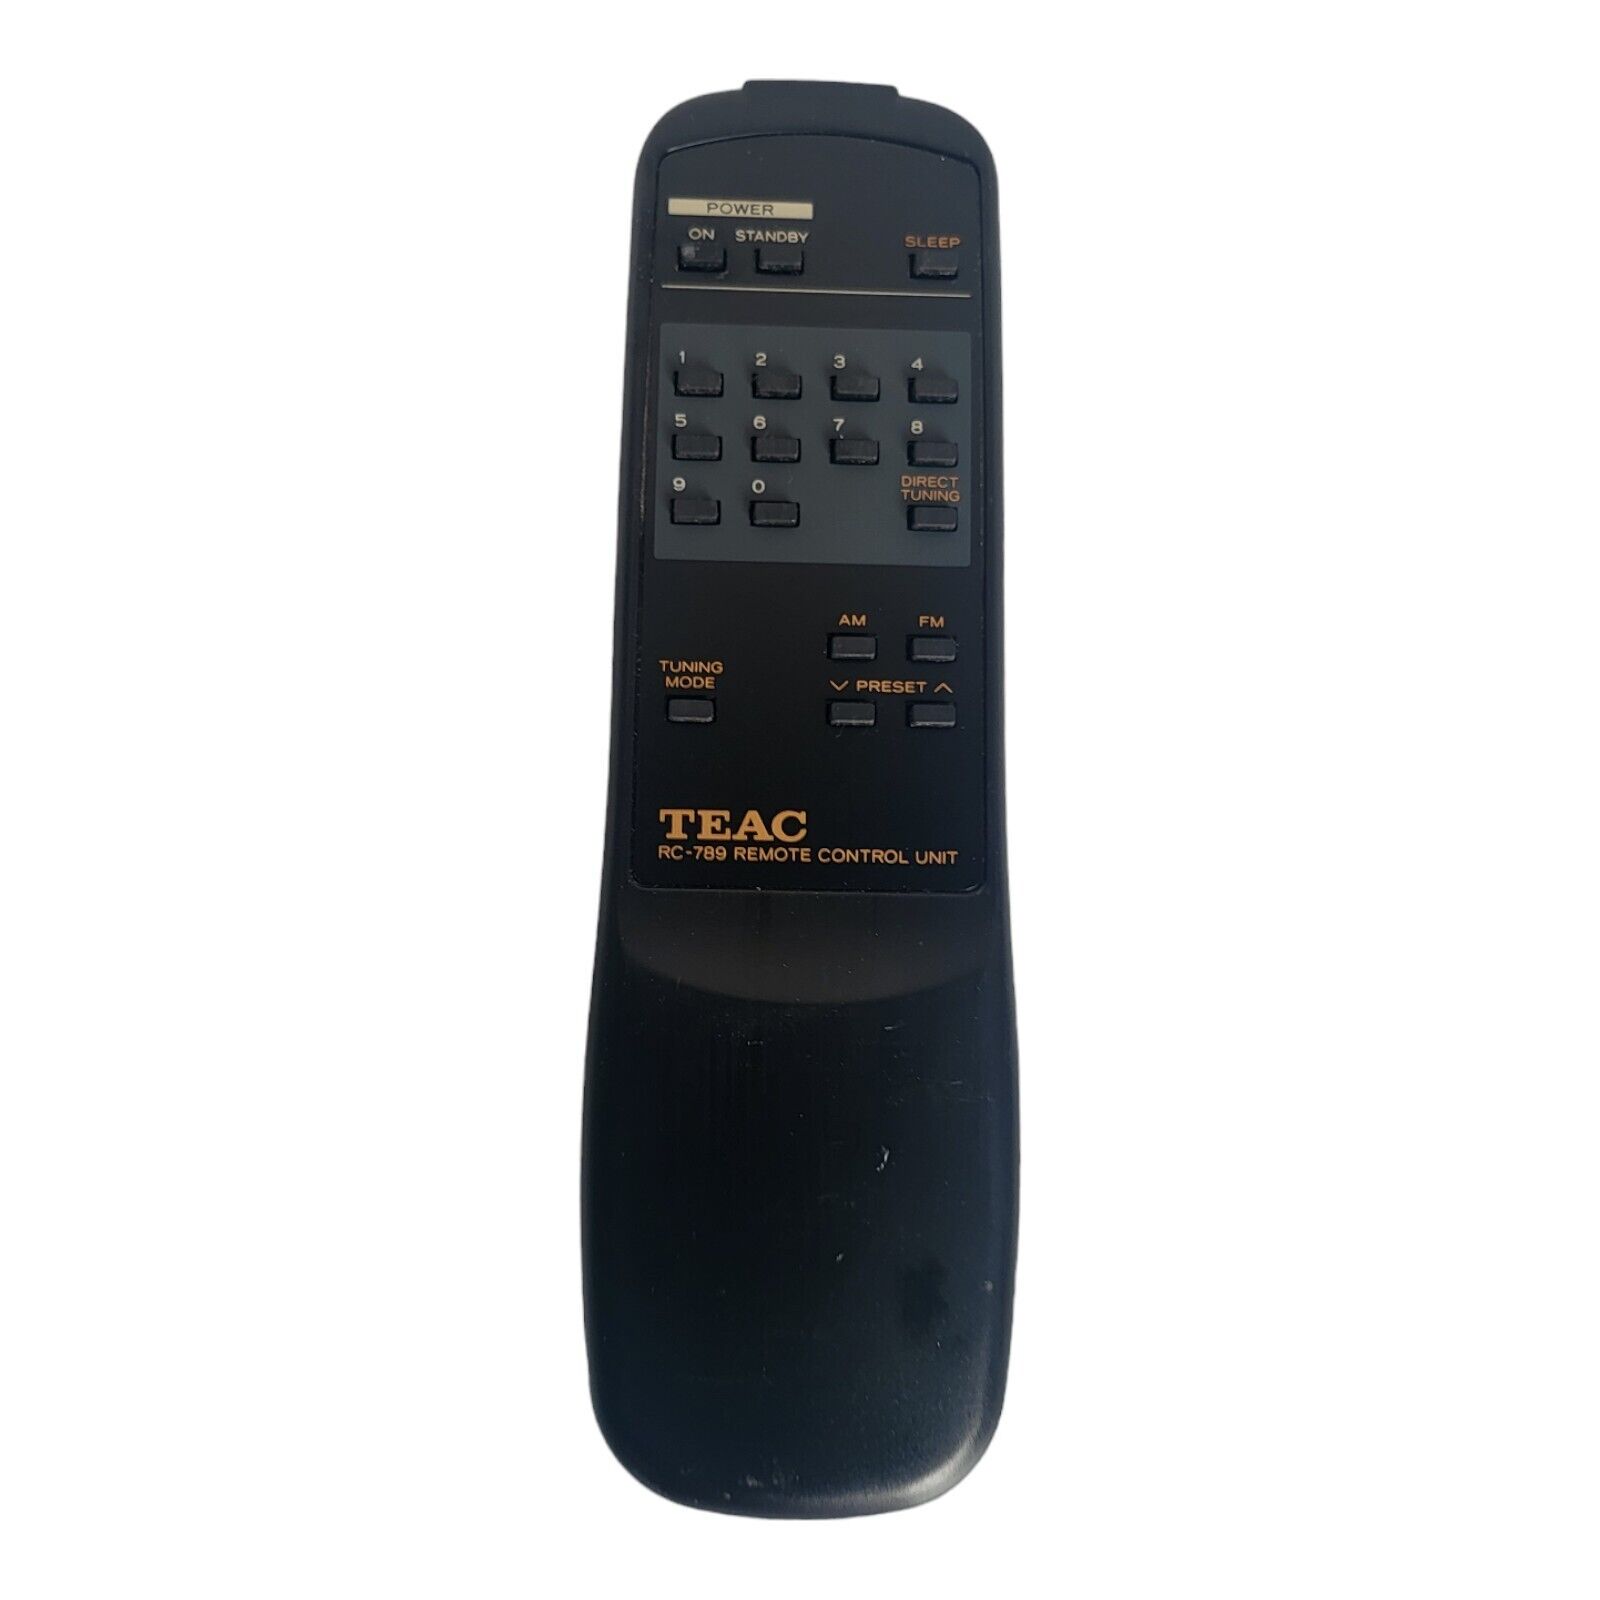 TEAC RC-789 Wireless Remote Control For TEAC T-R670